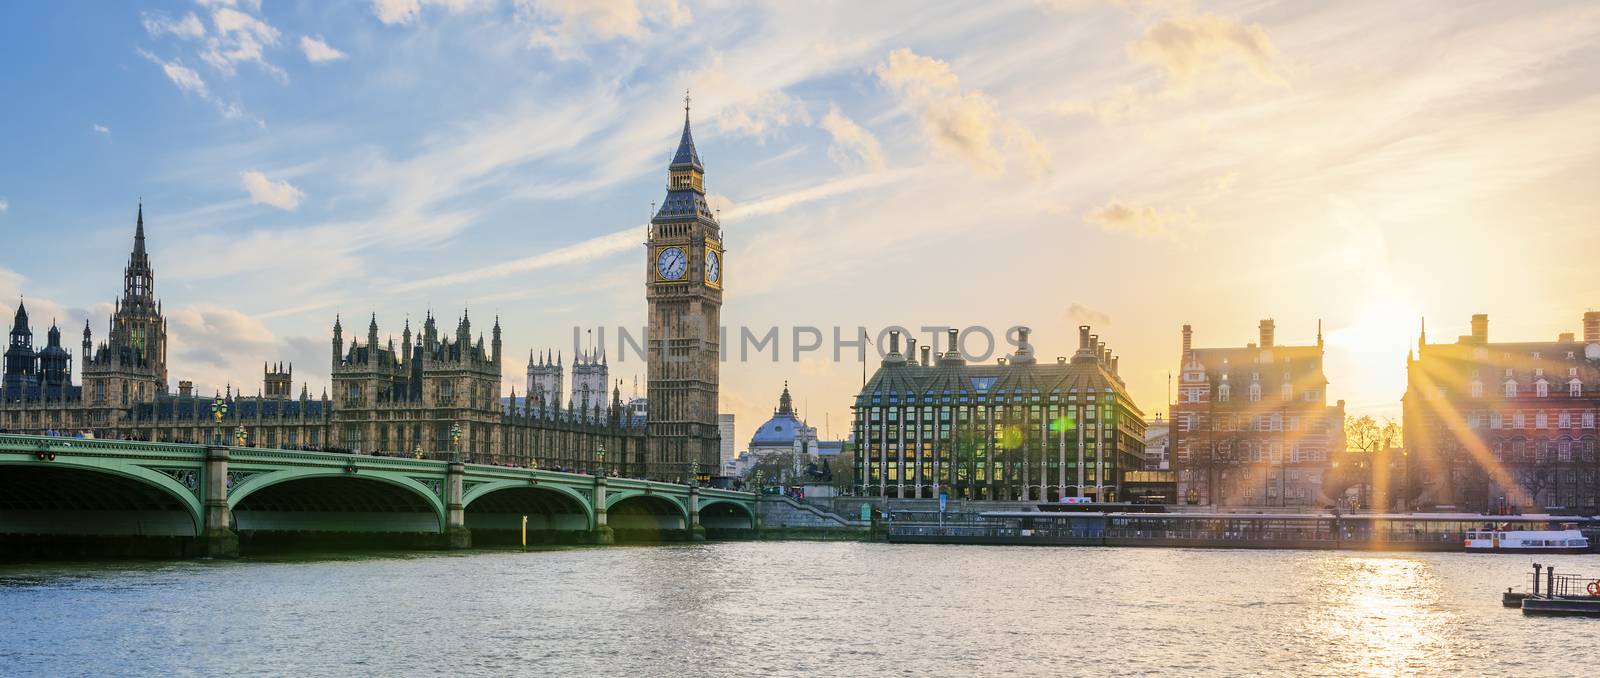 Panoramic view of Big Ben clock tower in London at sunset by vwalakte